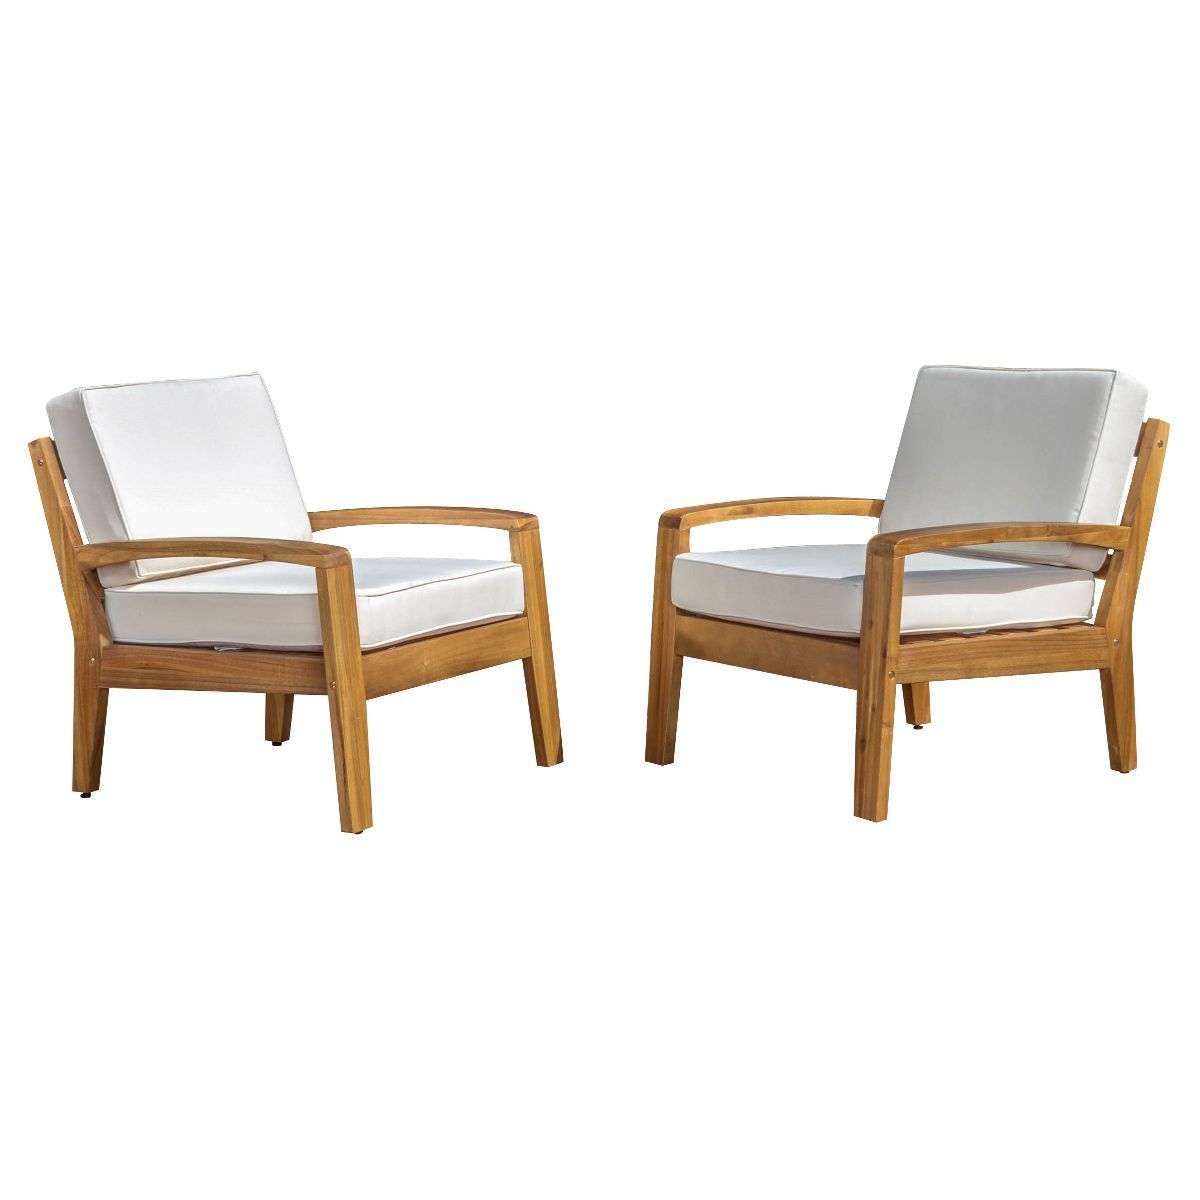 Grenada Set of 2 Wooden Club Chairs With Cushions - Christopher Knight Home | Target